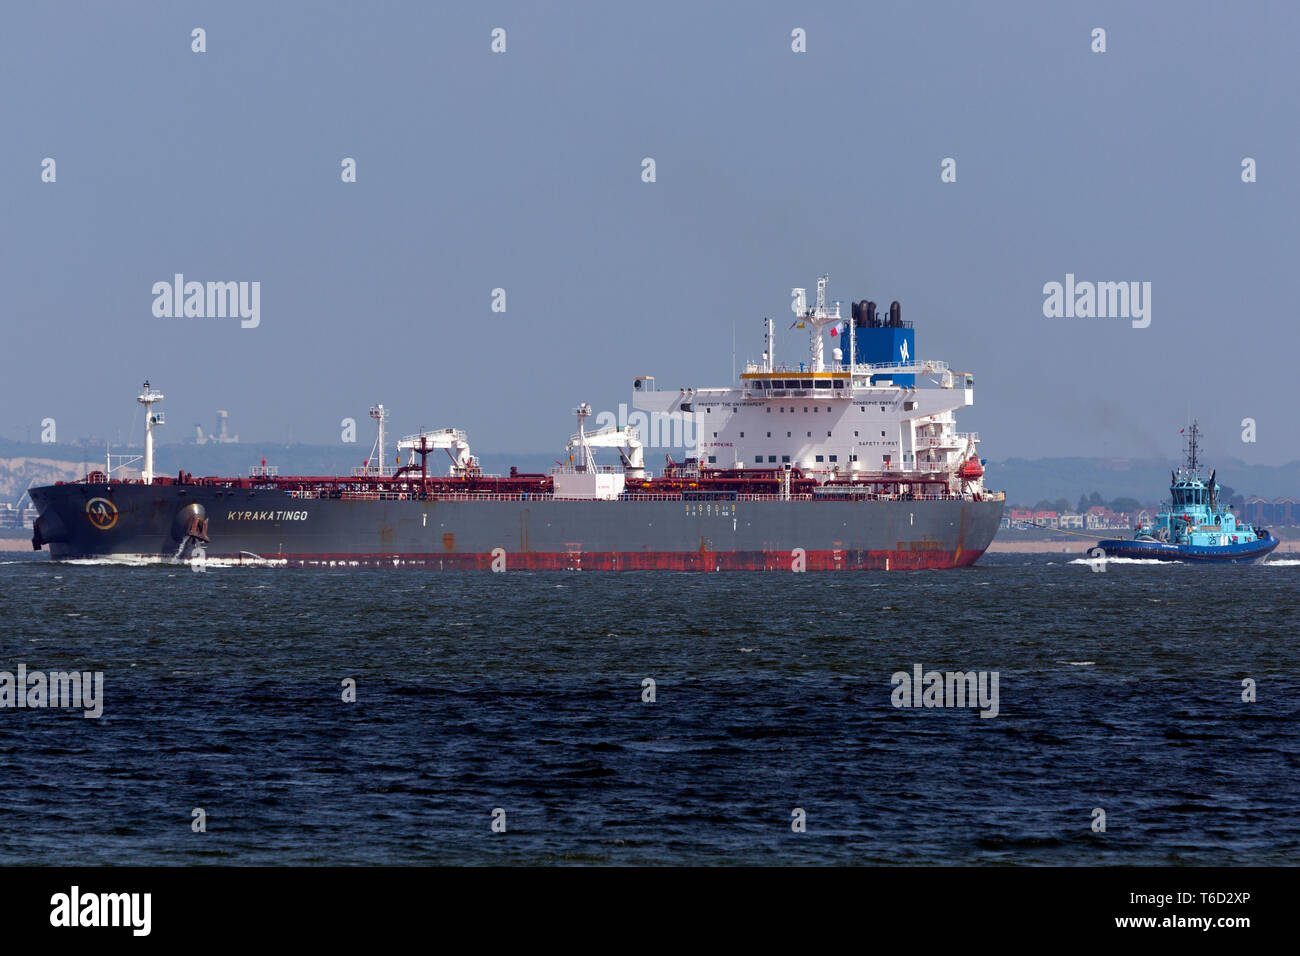 Kyrakatingo,Valletta,Voith,Schneider,power,system,propulsion,Chemical,Southampton,services,port,towing,Tanker,Oil,Refinery,Fawley,The Solent, Stock Photo